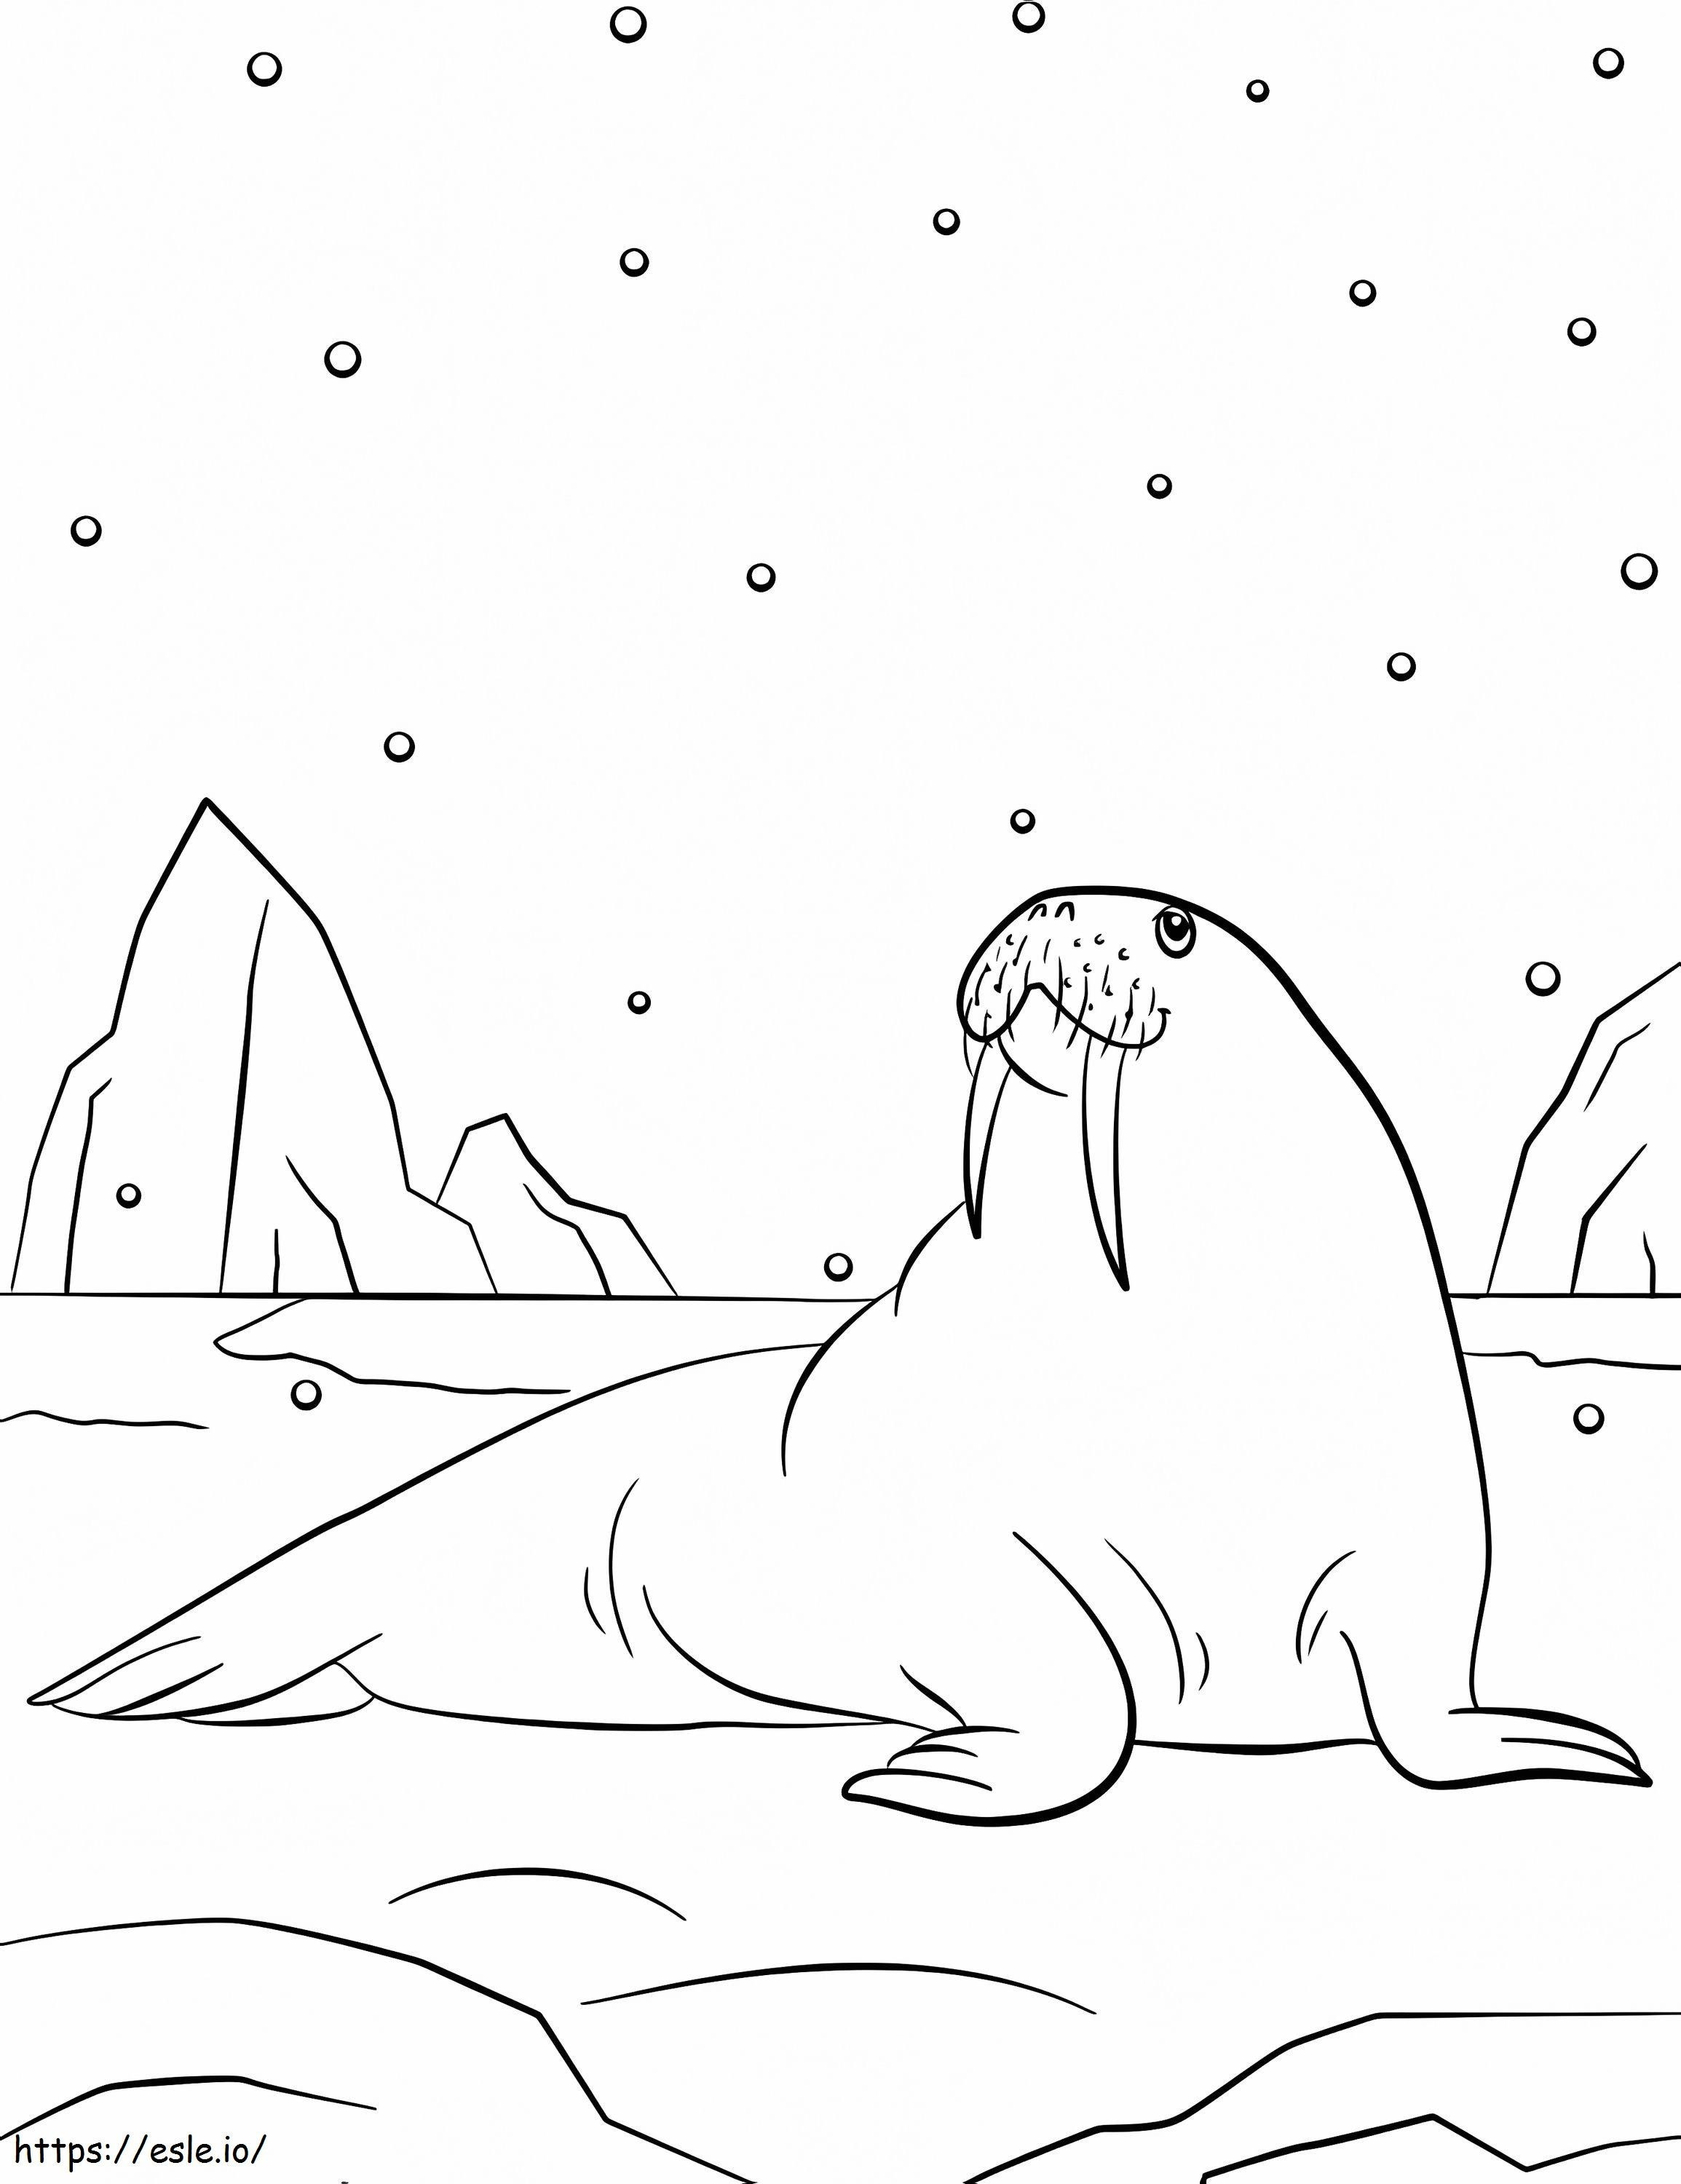 Walrus And Snowflakes coloring page